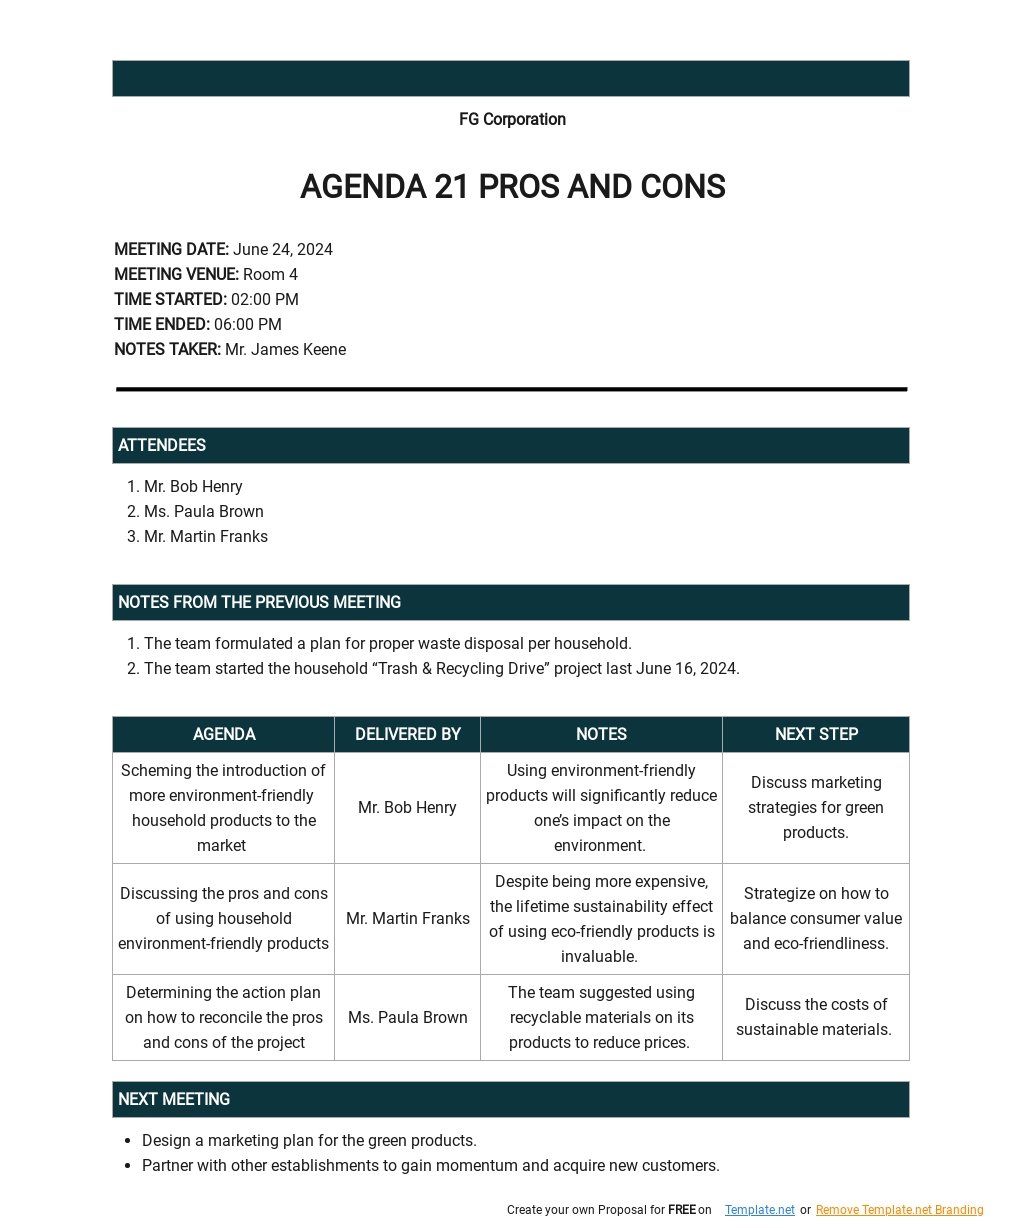 Agenda 21 Pros and Cons Template